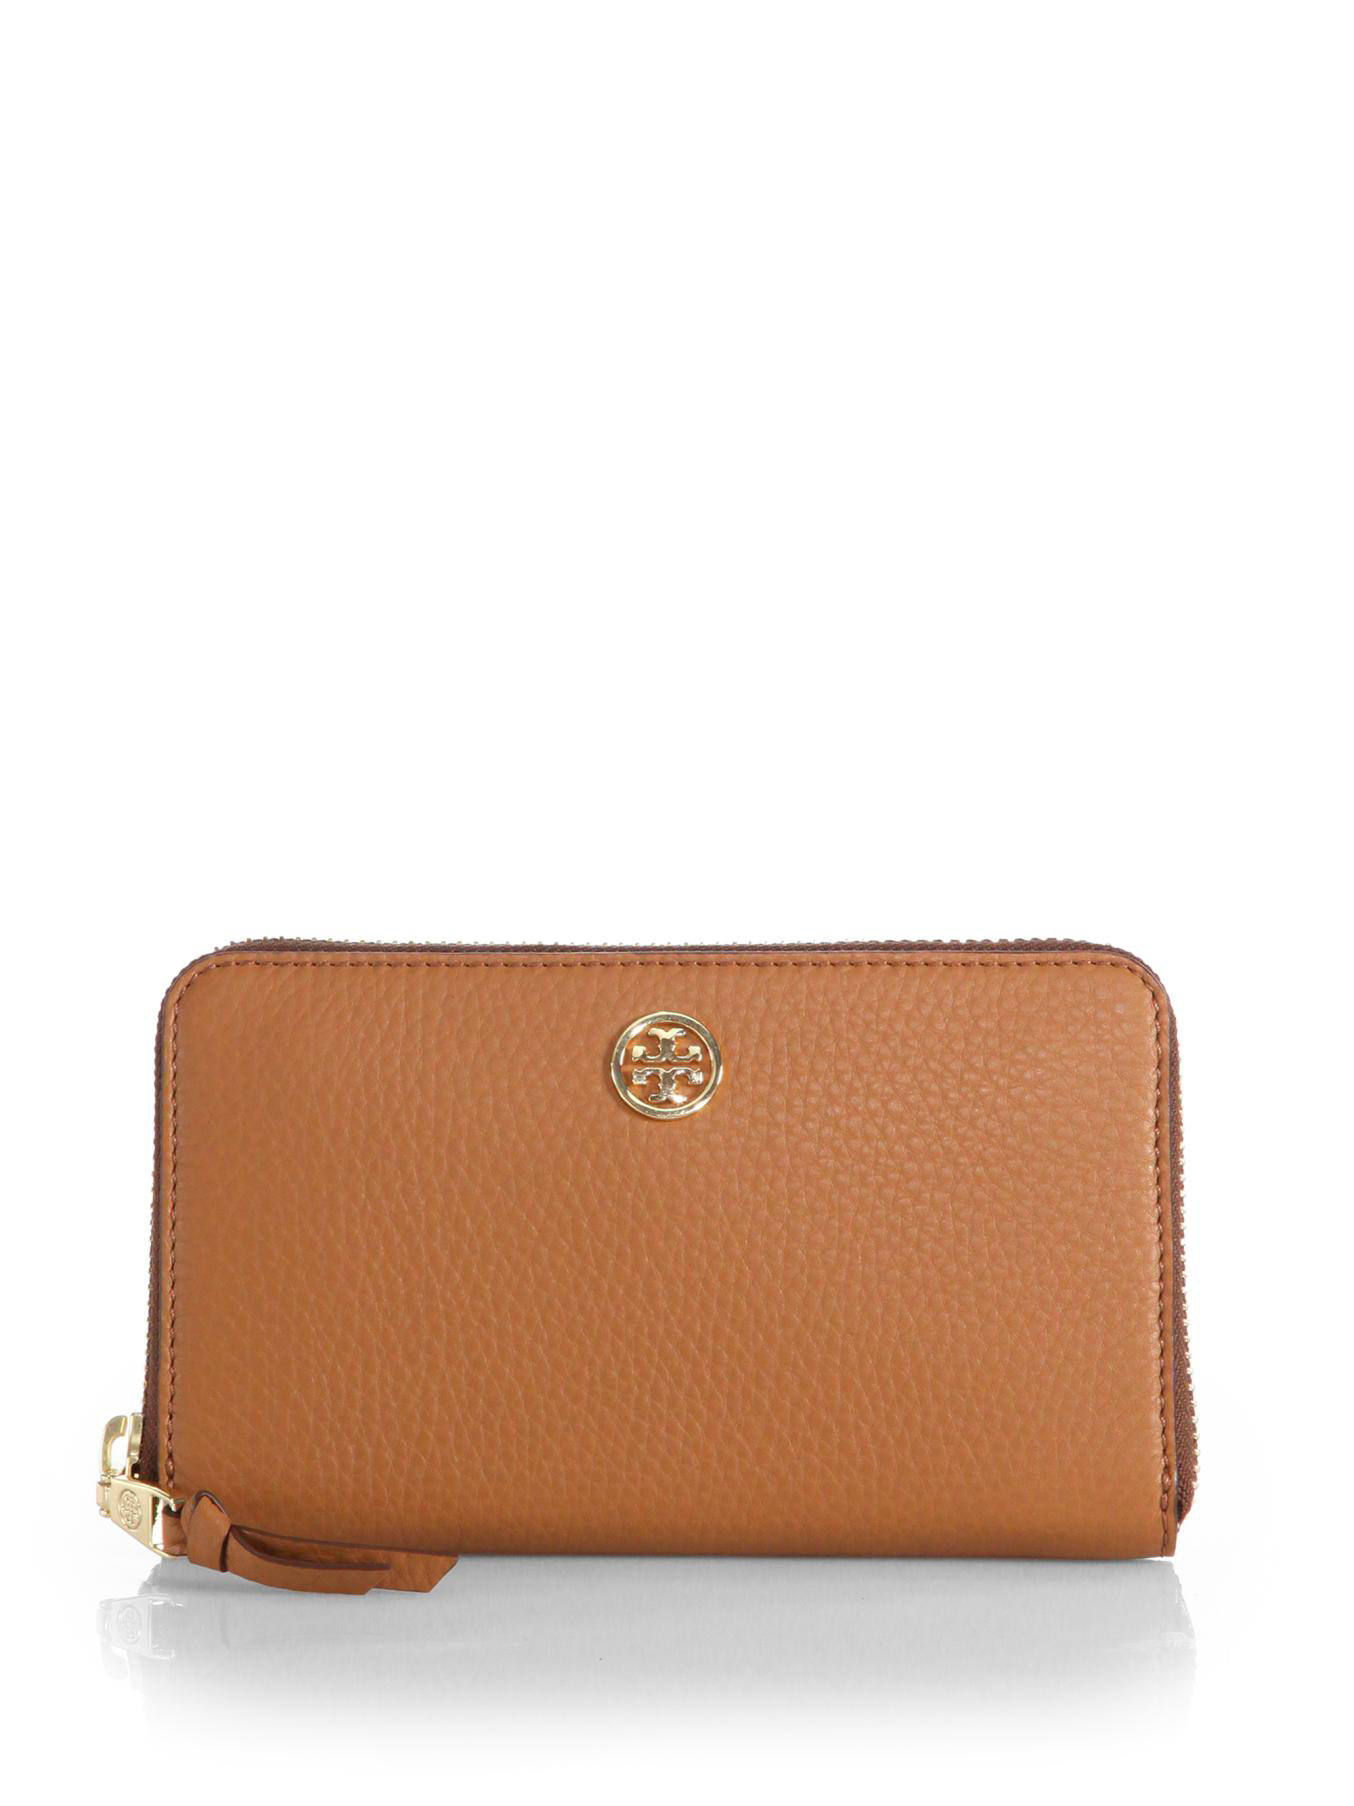 Tory Burch Robinson Pebbled Continental Wallet in Brown (TIGERS EYE) | Lyst